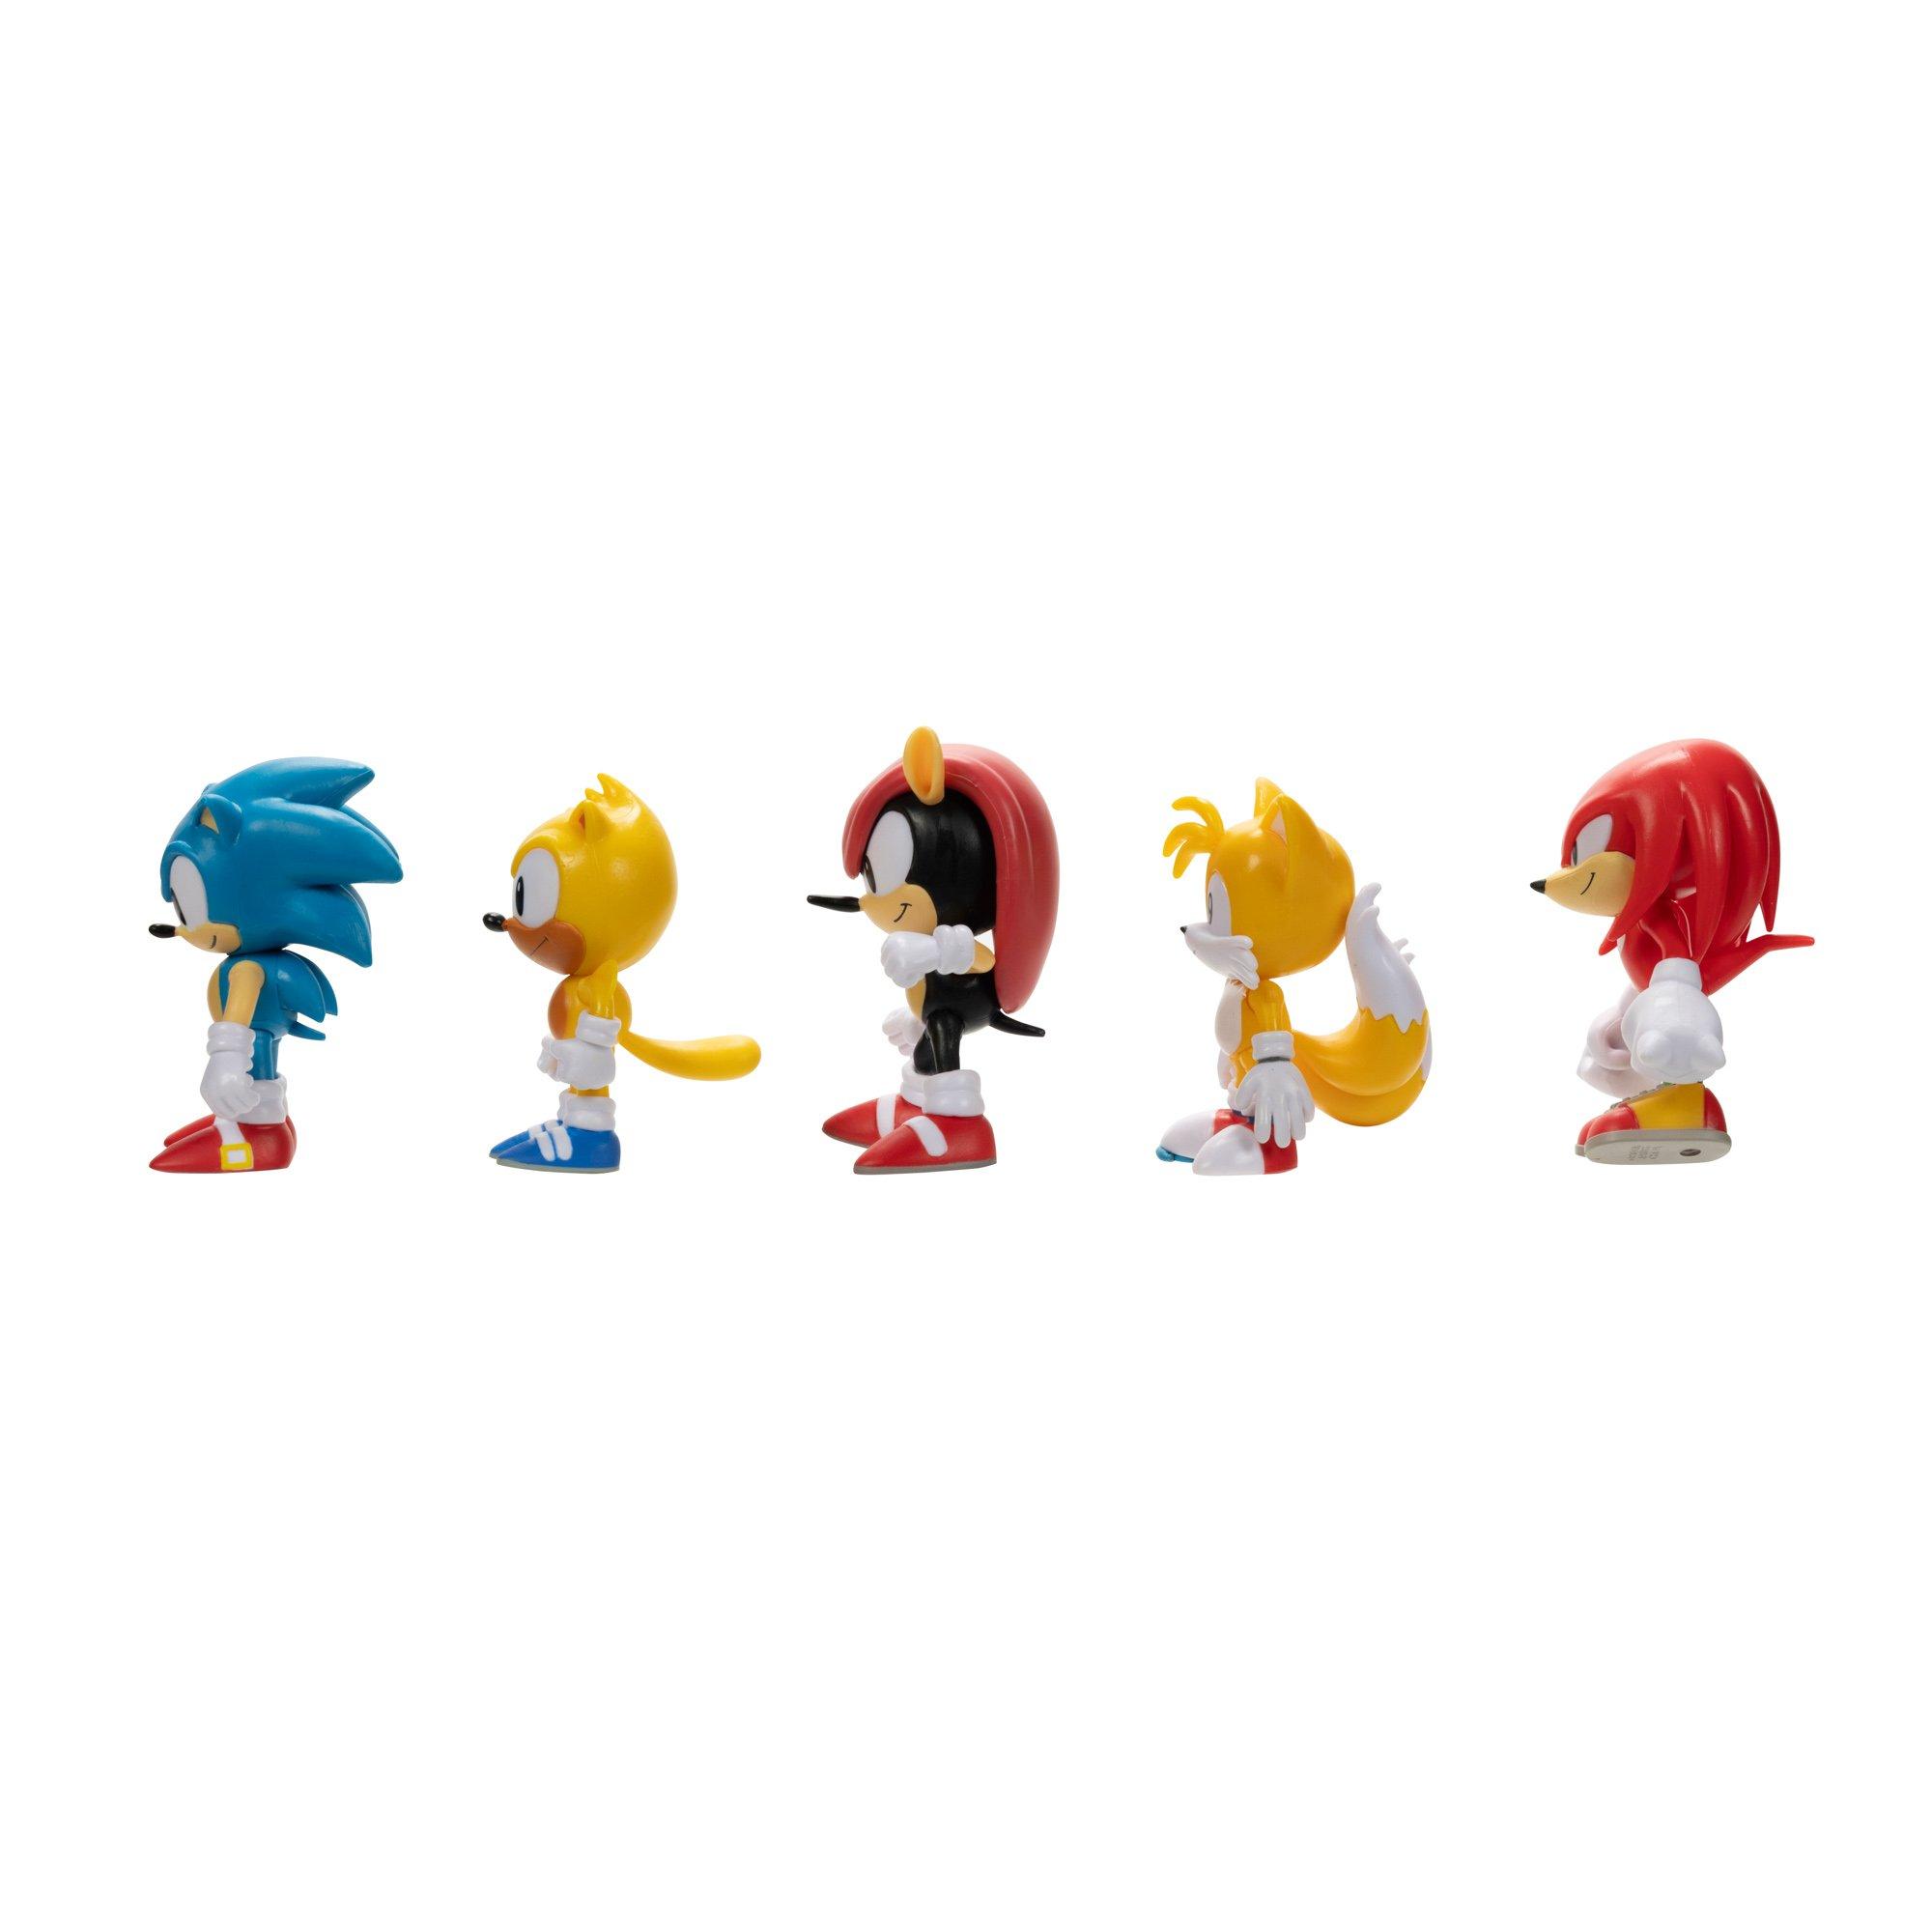 Classic Sonic The Hedgehog Collection 5 pack by Jakks Pacific 